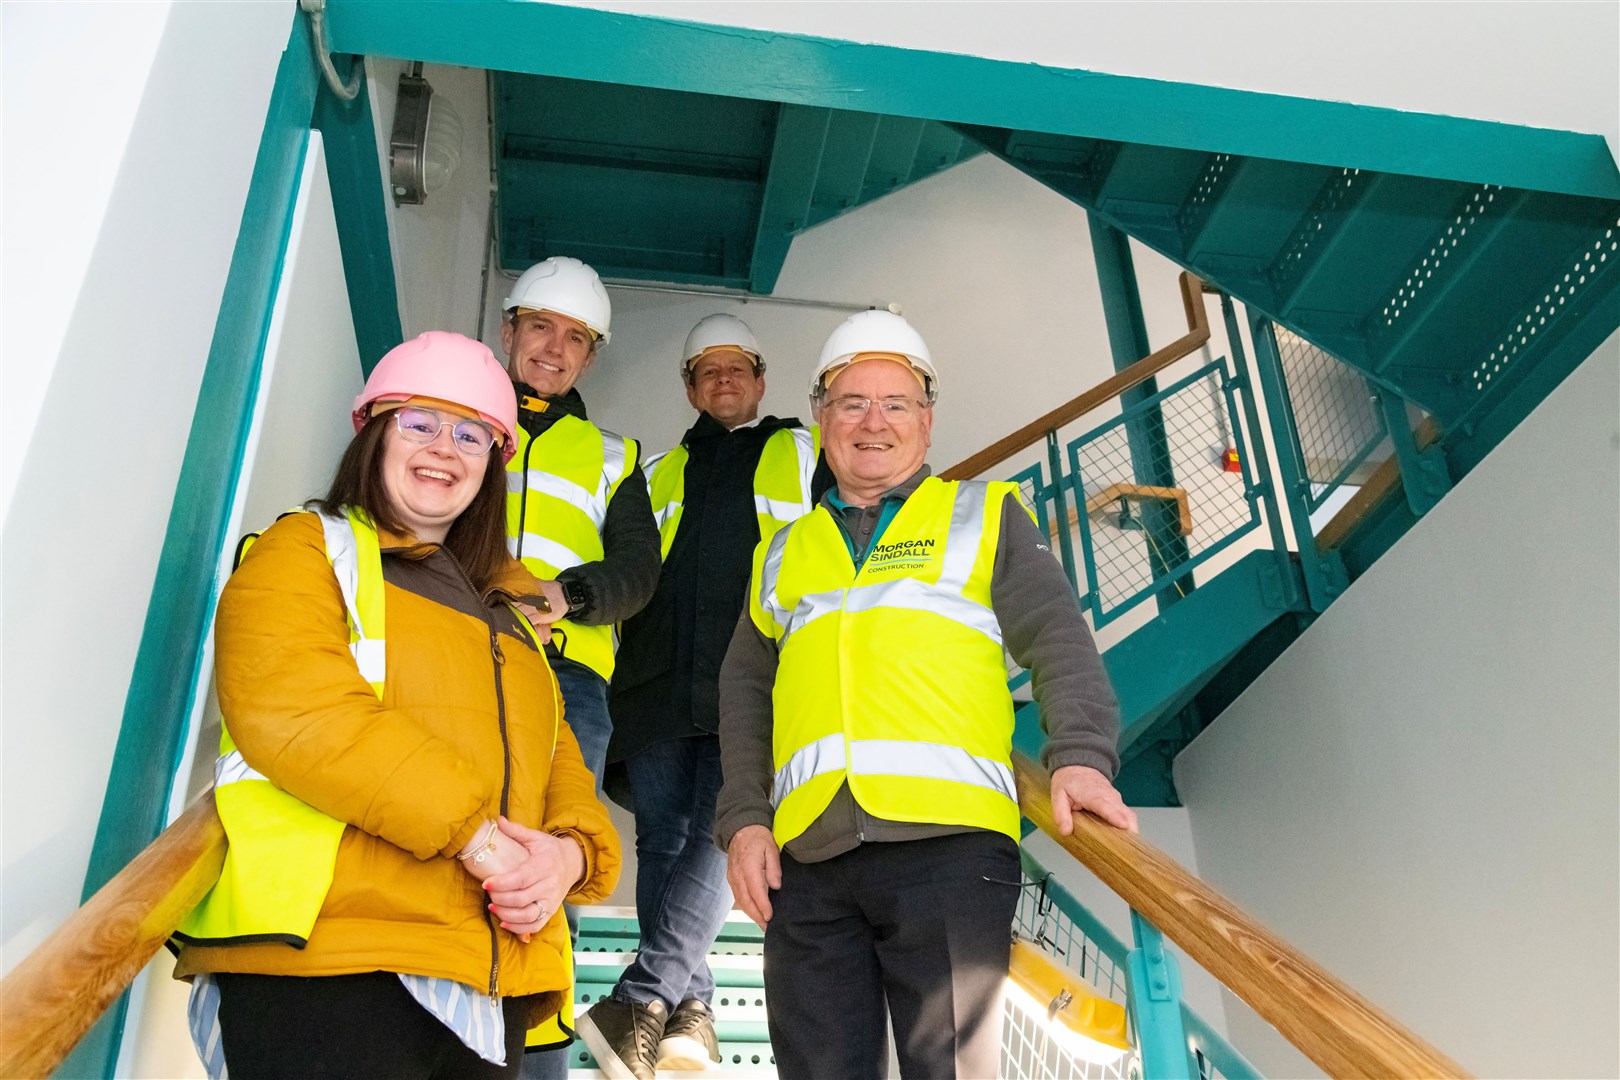 Inside the newly refurbished Poundland in Elgin. From left: Architect at LDN Pinny Muir, retail director Alan Smallman, director of property portfolio Ben Wall and store manager Gerry McAloon.